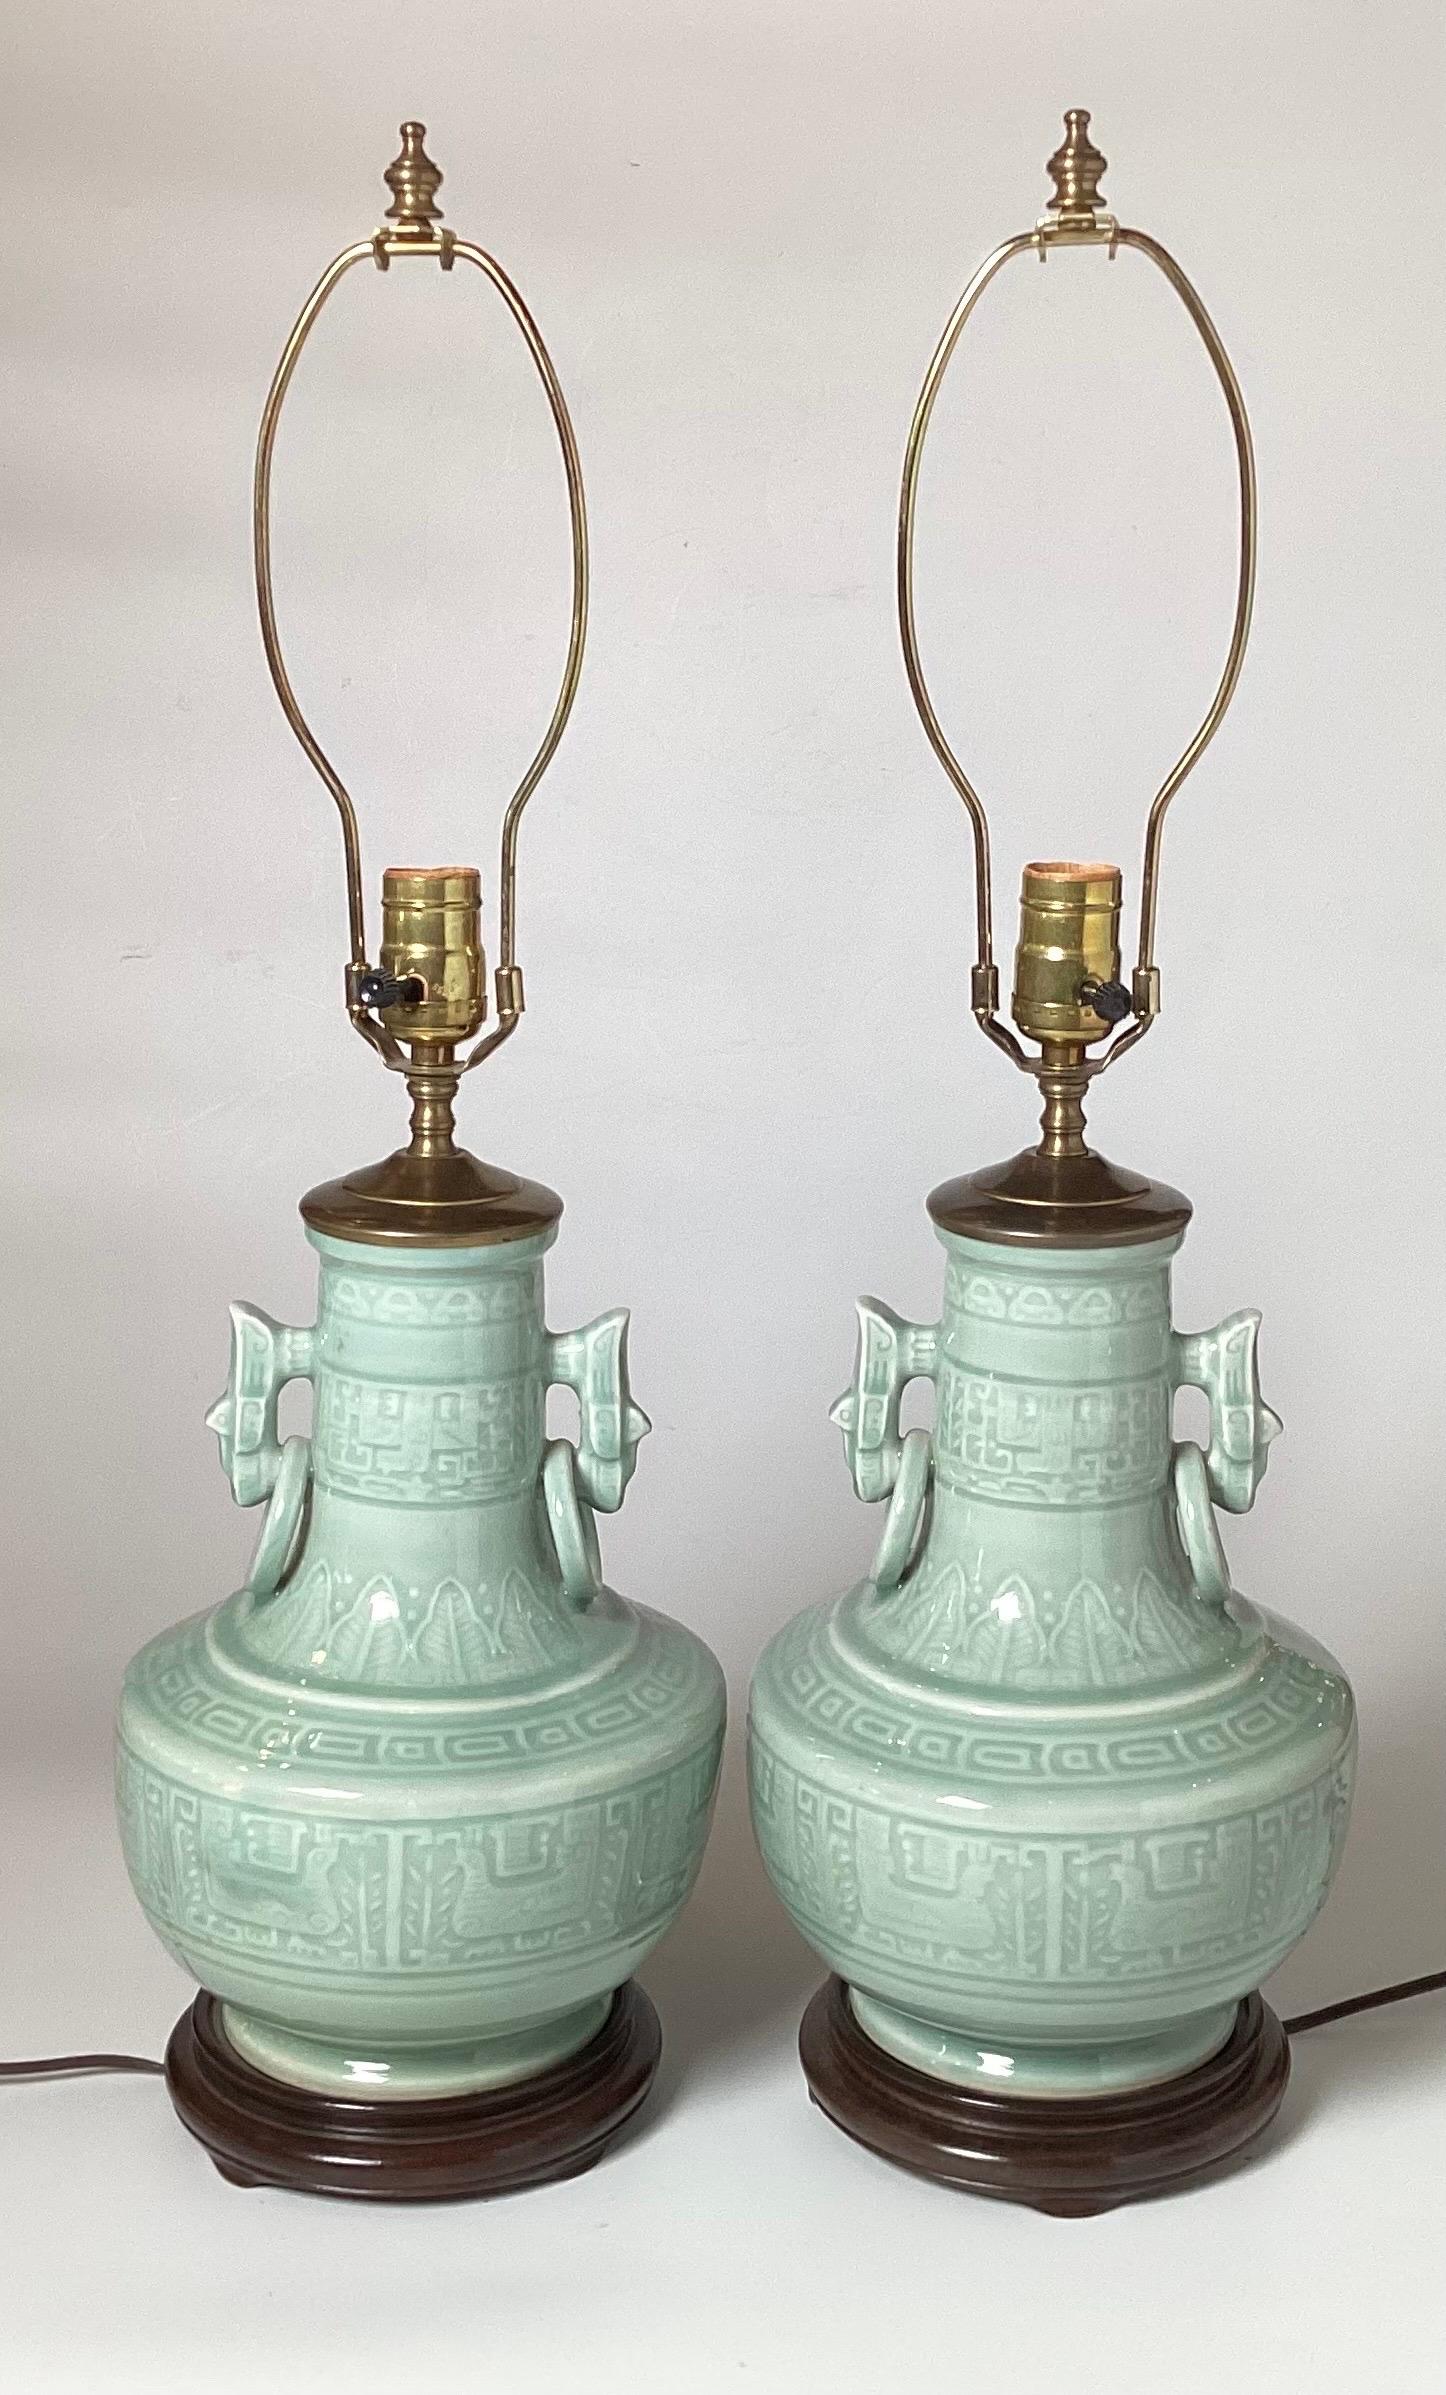 Pair of Late 20th century Asian style Celadon table lamps in very good condition.